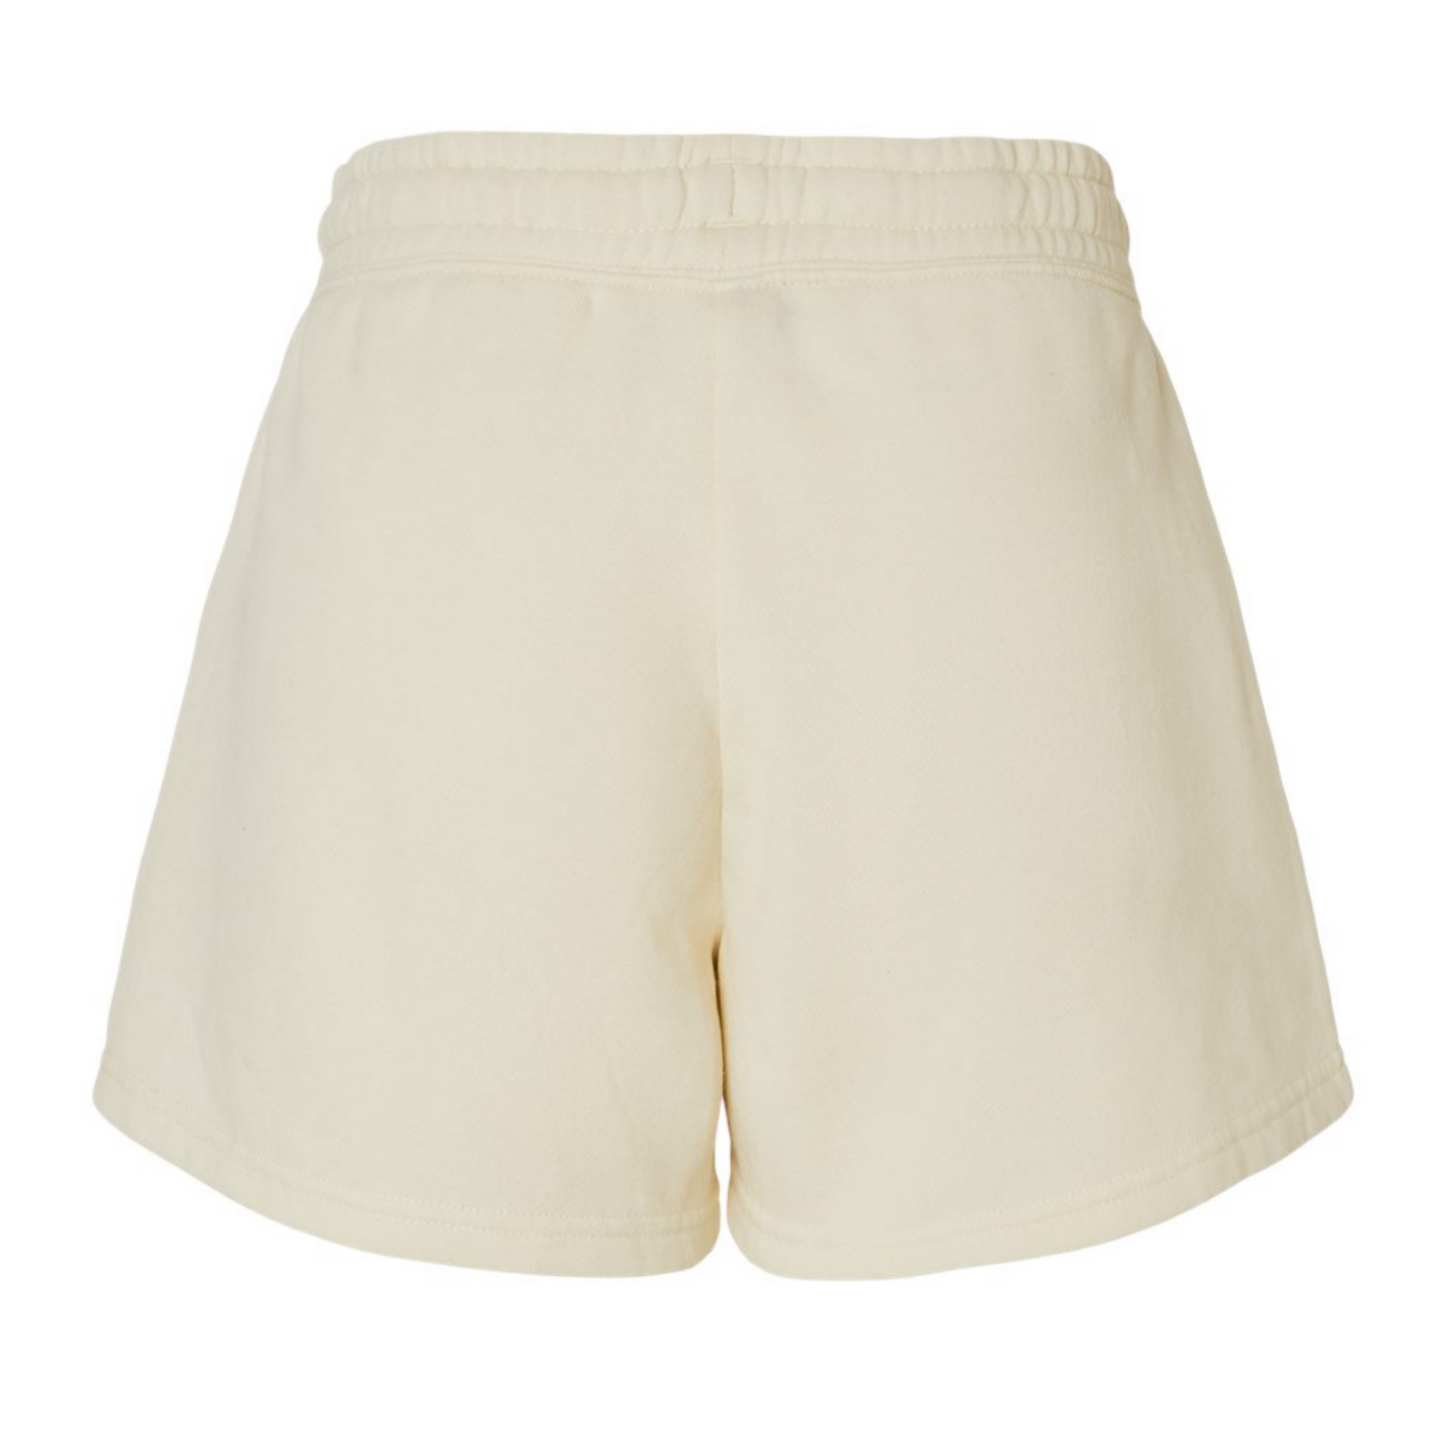 Mama Shorts in cream with a comfy warm fabric. Draw strings loop the front and small emblem of "mama" is on the right hand side of the short in black - on the front. This is the back view of the shorts.